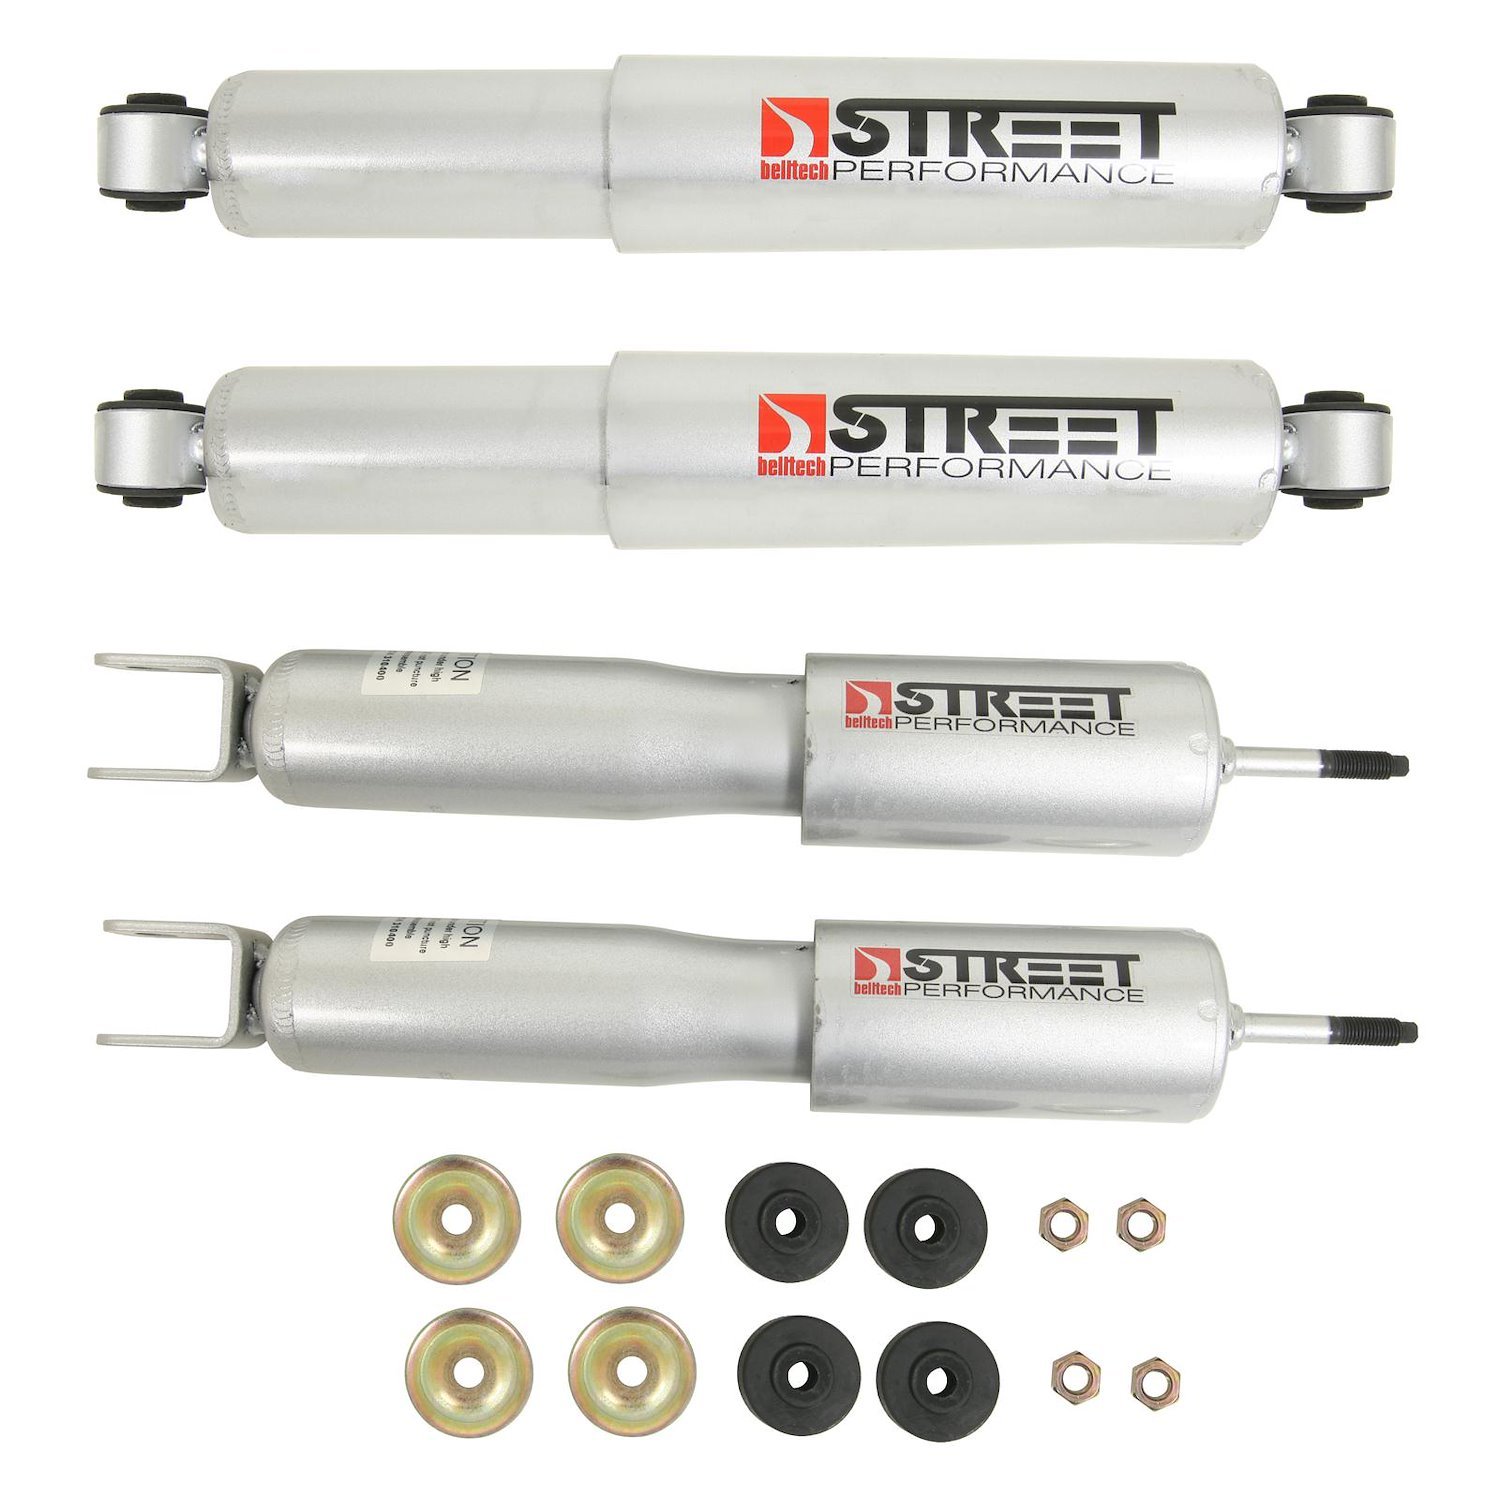 Street Performance Shock Set includes (2) 146-25003 Front